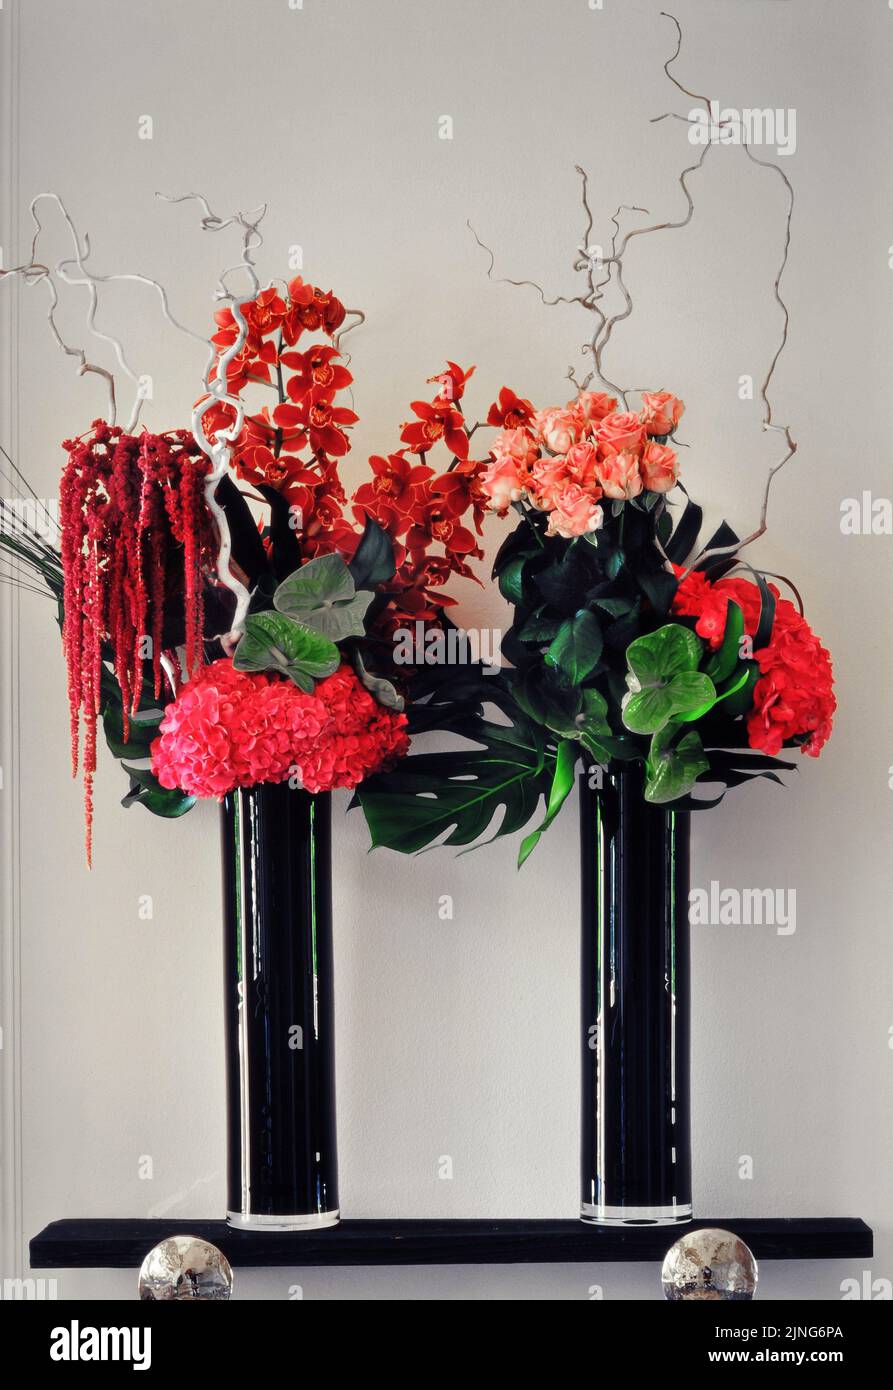 Flowers at home, Flowers   Design, floral arrangement of roses, orchids and petunias. Stock Photo